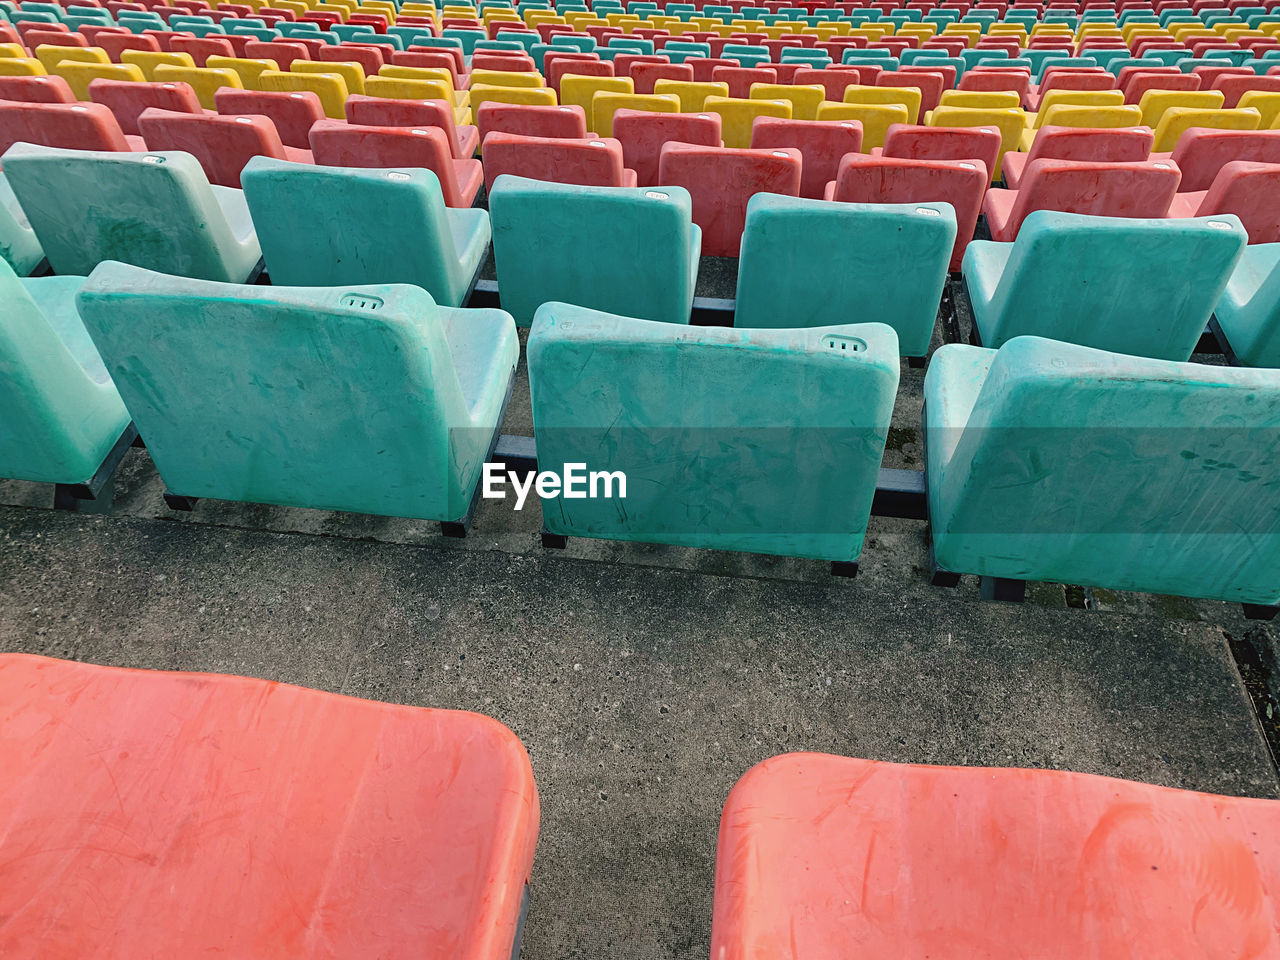 HIGH ANGLE VIEW OF EMPTY CHAIRS AT STADIUM